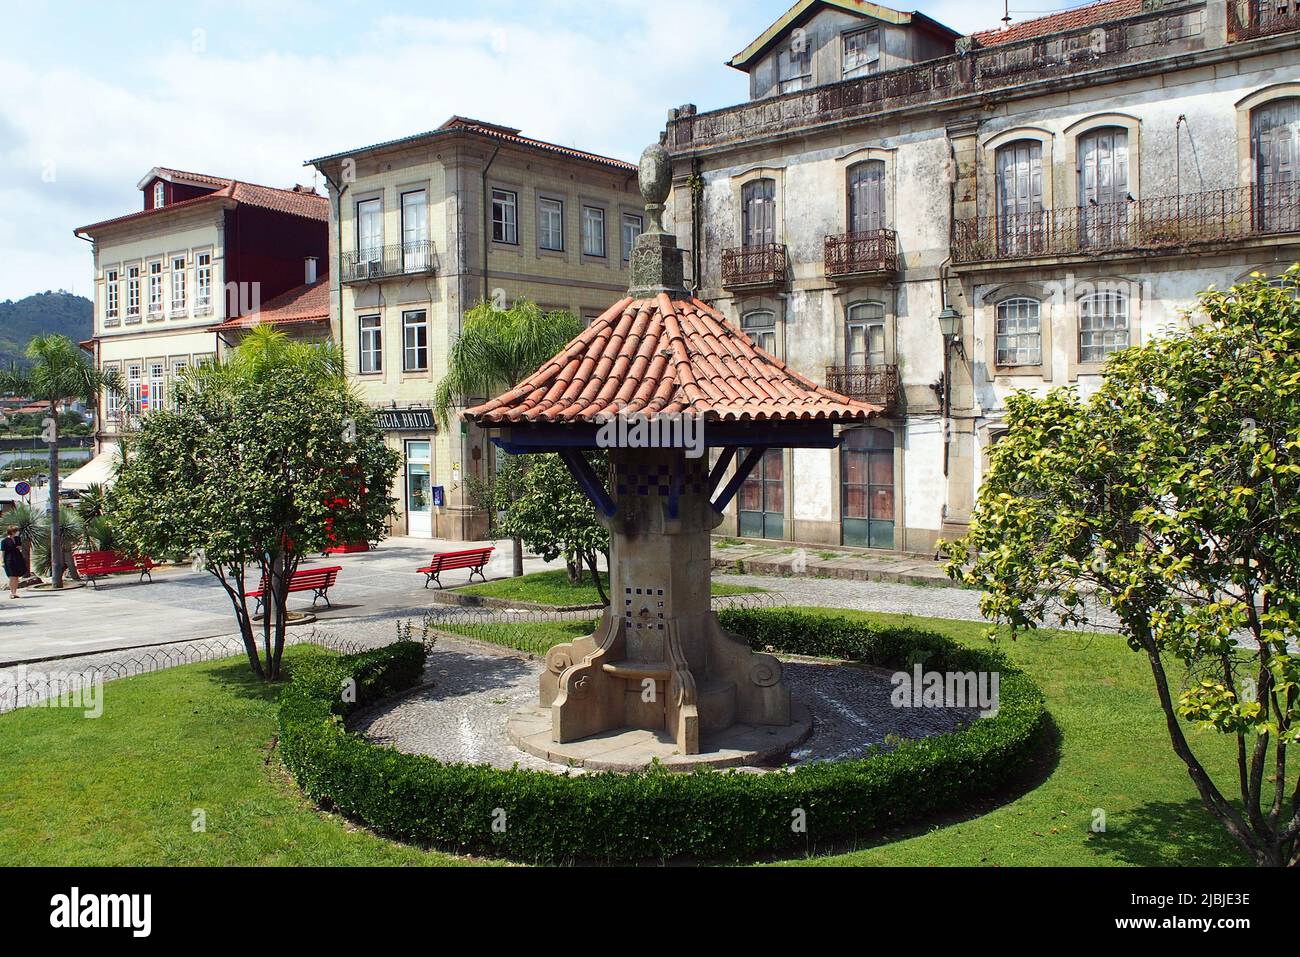 Street scene in the old town, at Largo Antonio de Magalhaes, old tile-roofed drinking fountain, Ponte de Lima, Portugal Stock Photo